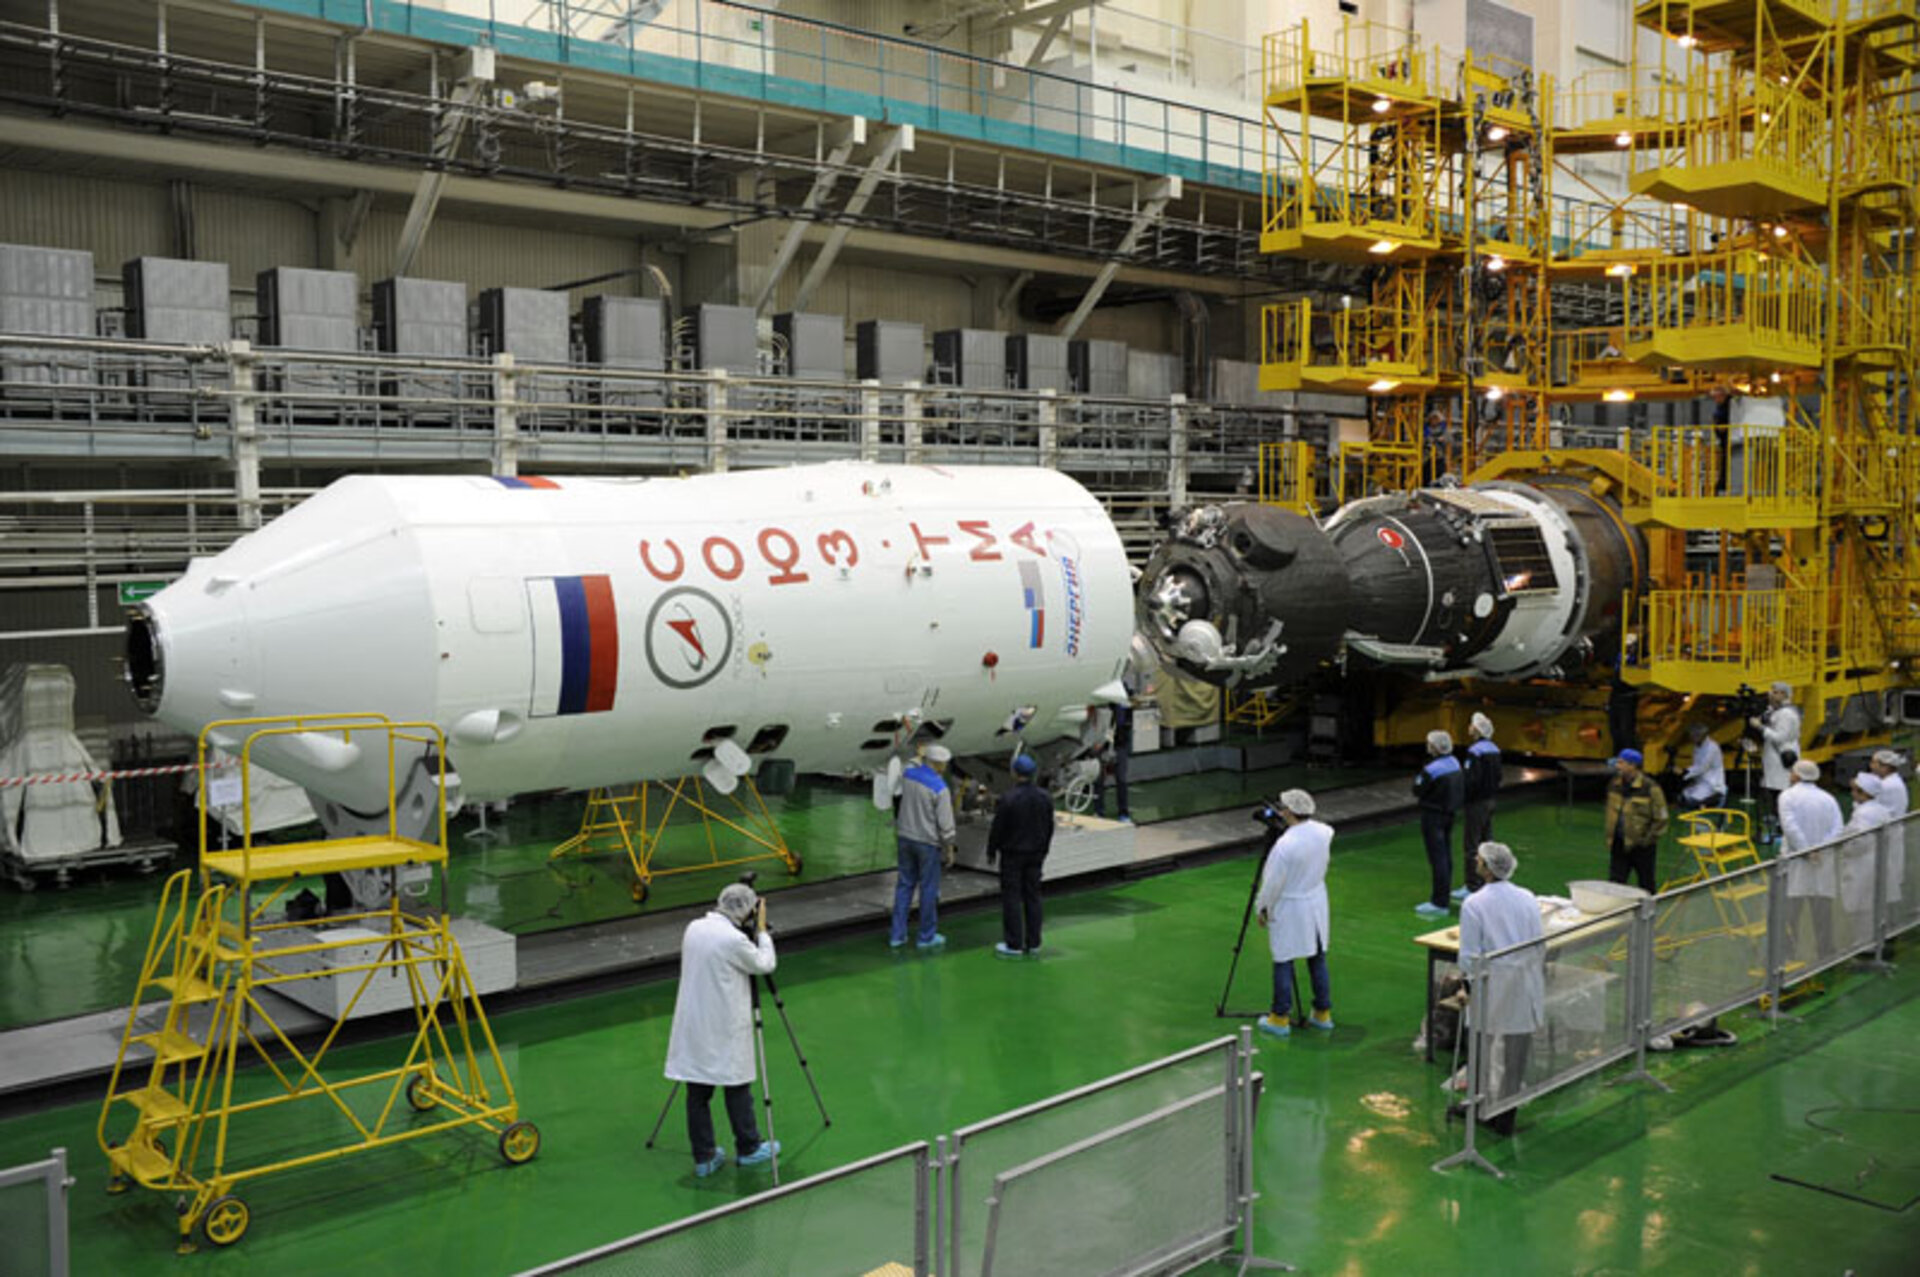 Soyuz TMA-03M ready for insertion into launcher's nose cone